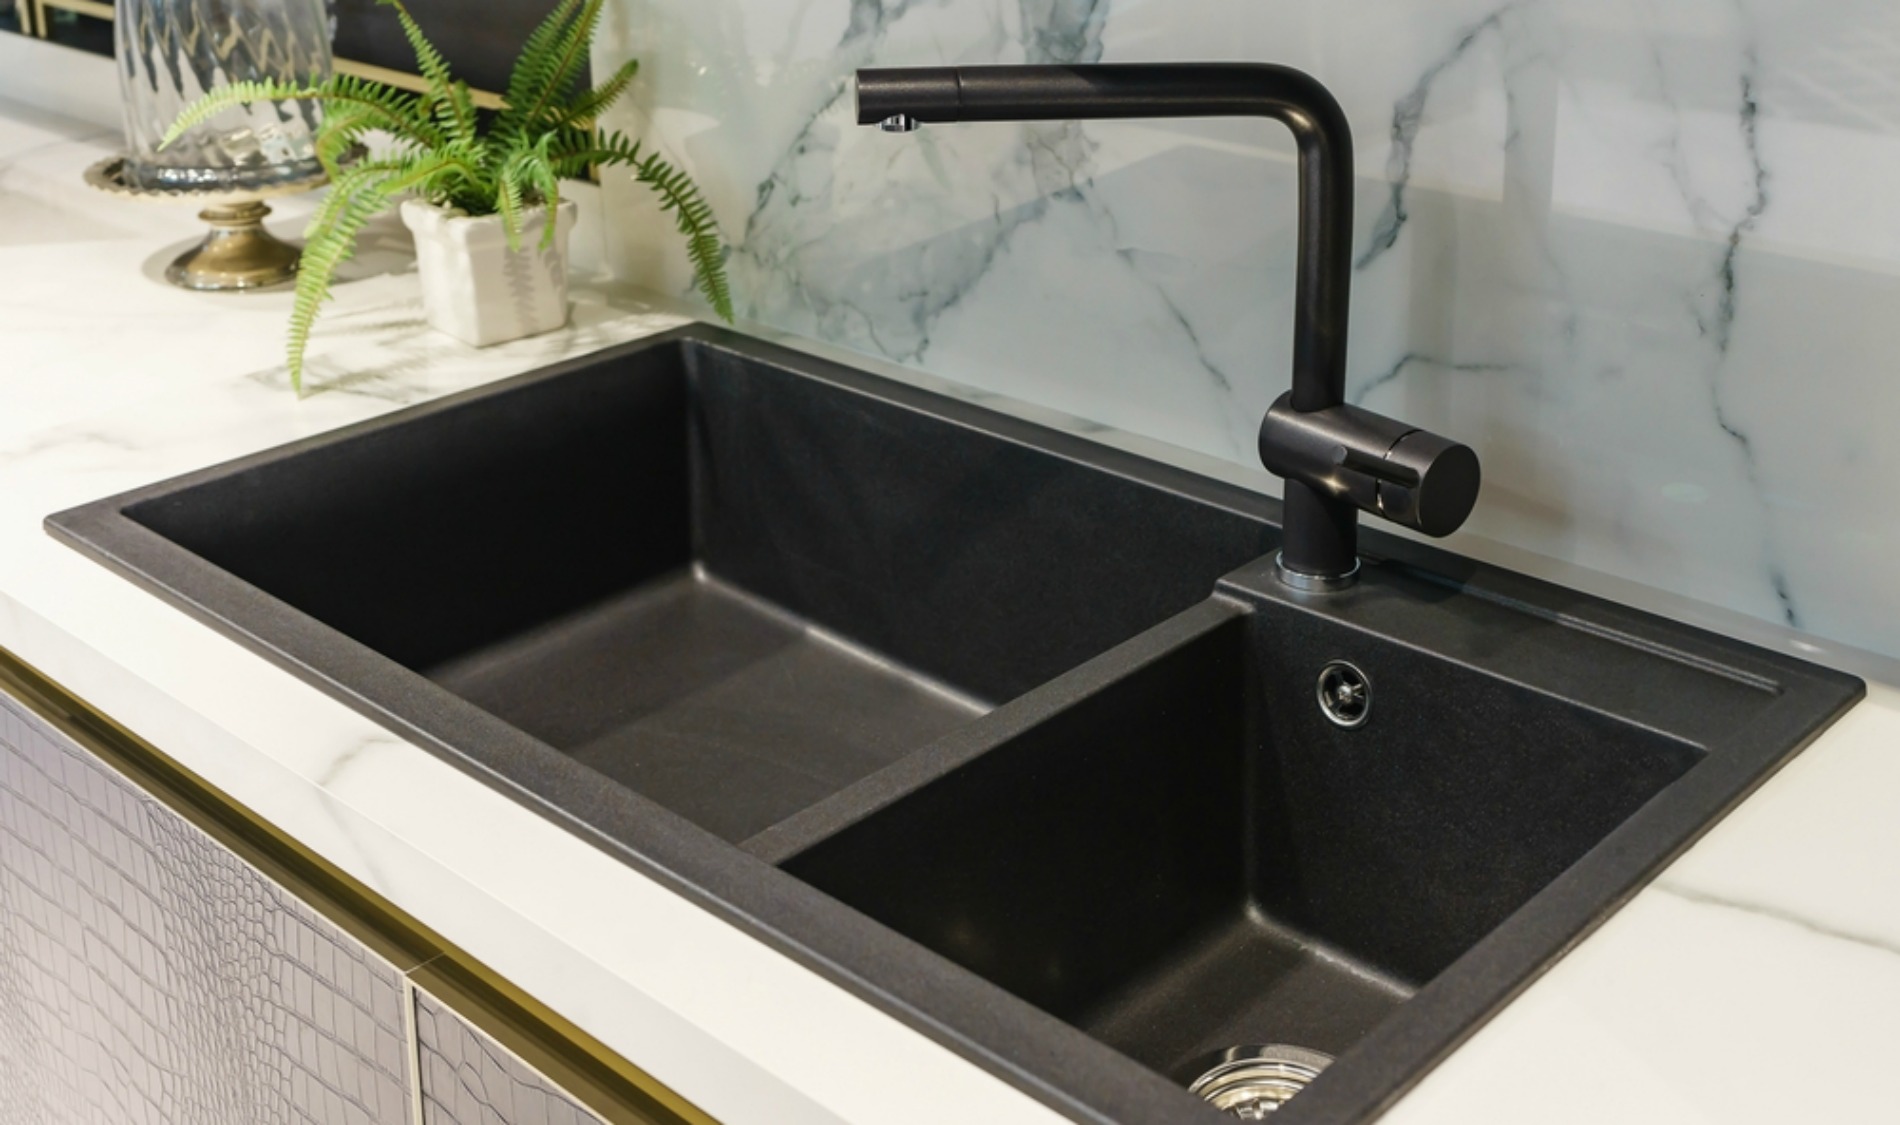 Is it important to clean a granite sink regularly?